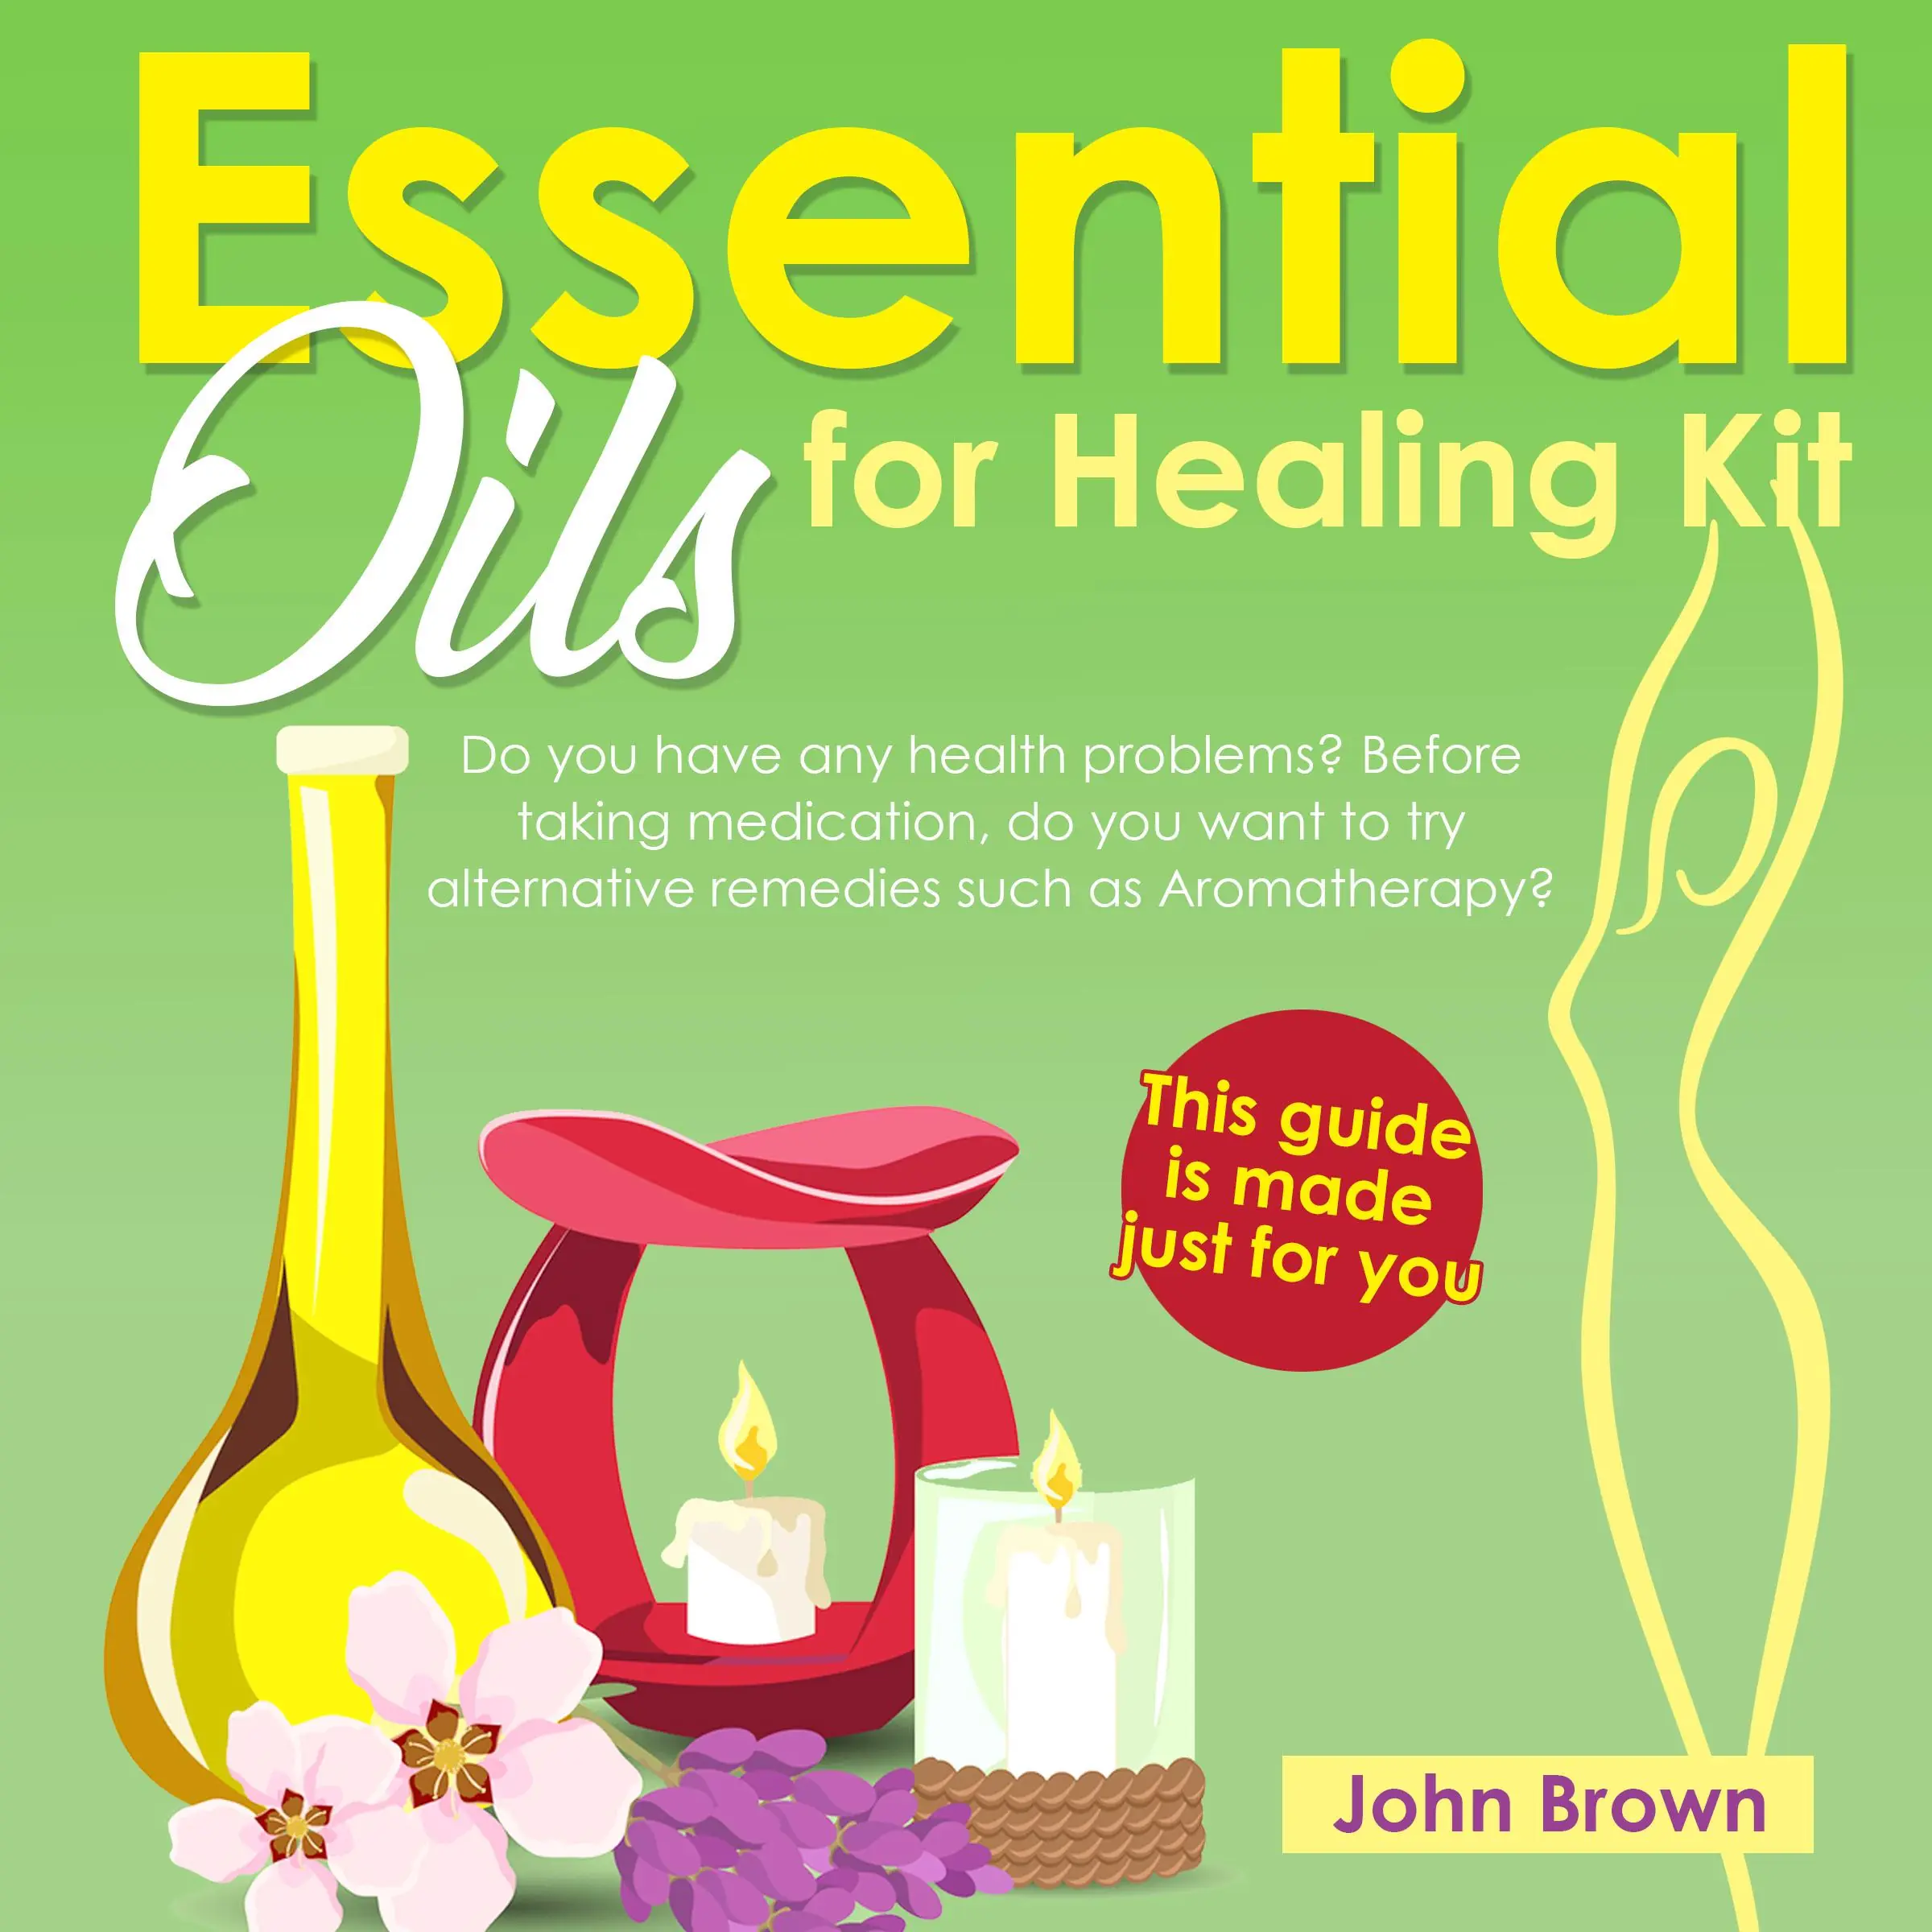 Essential Oils for Healing Kit Audiobook by John Brown